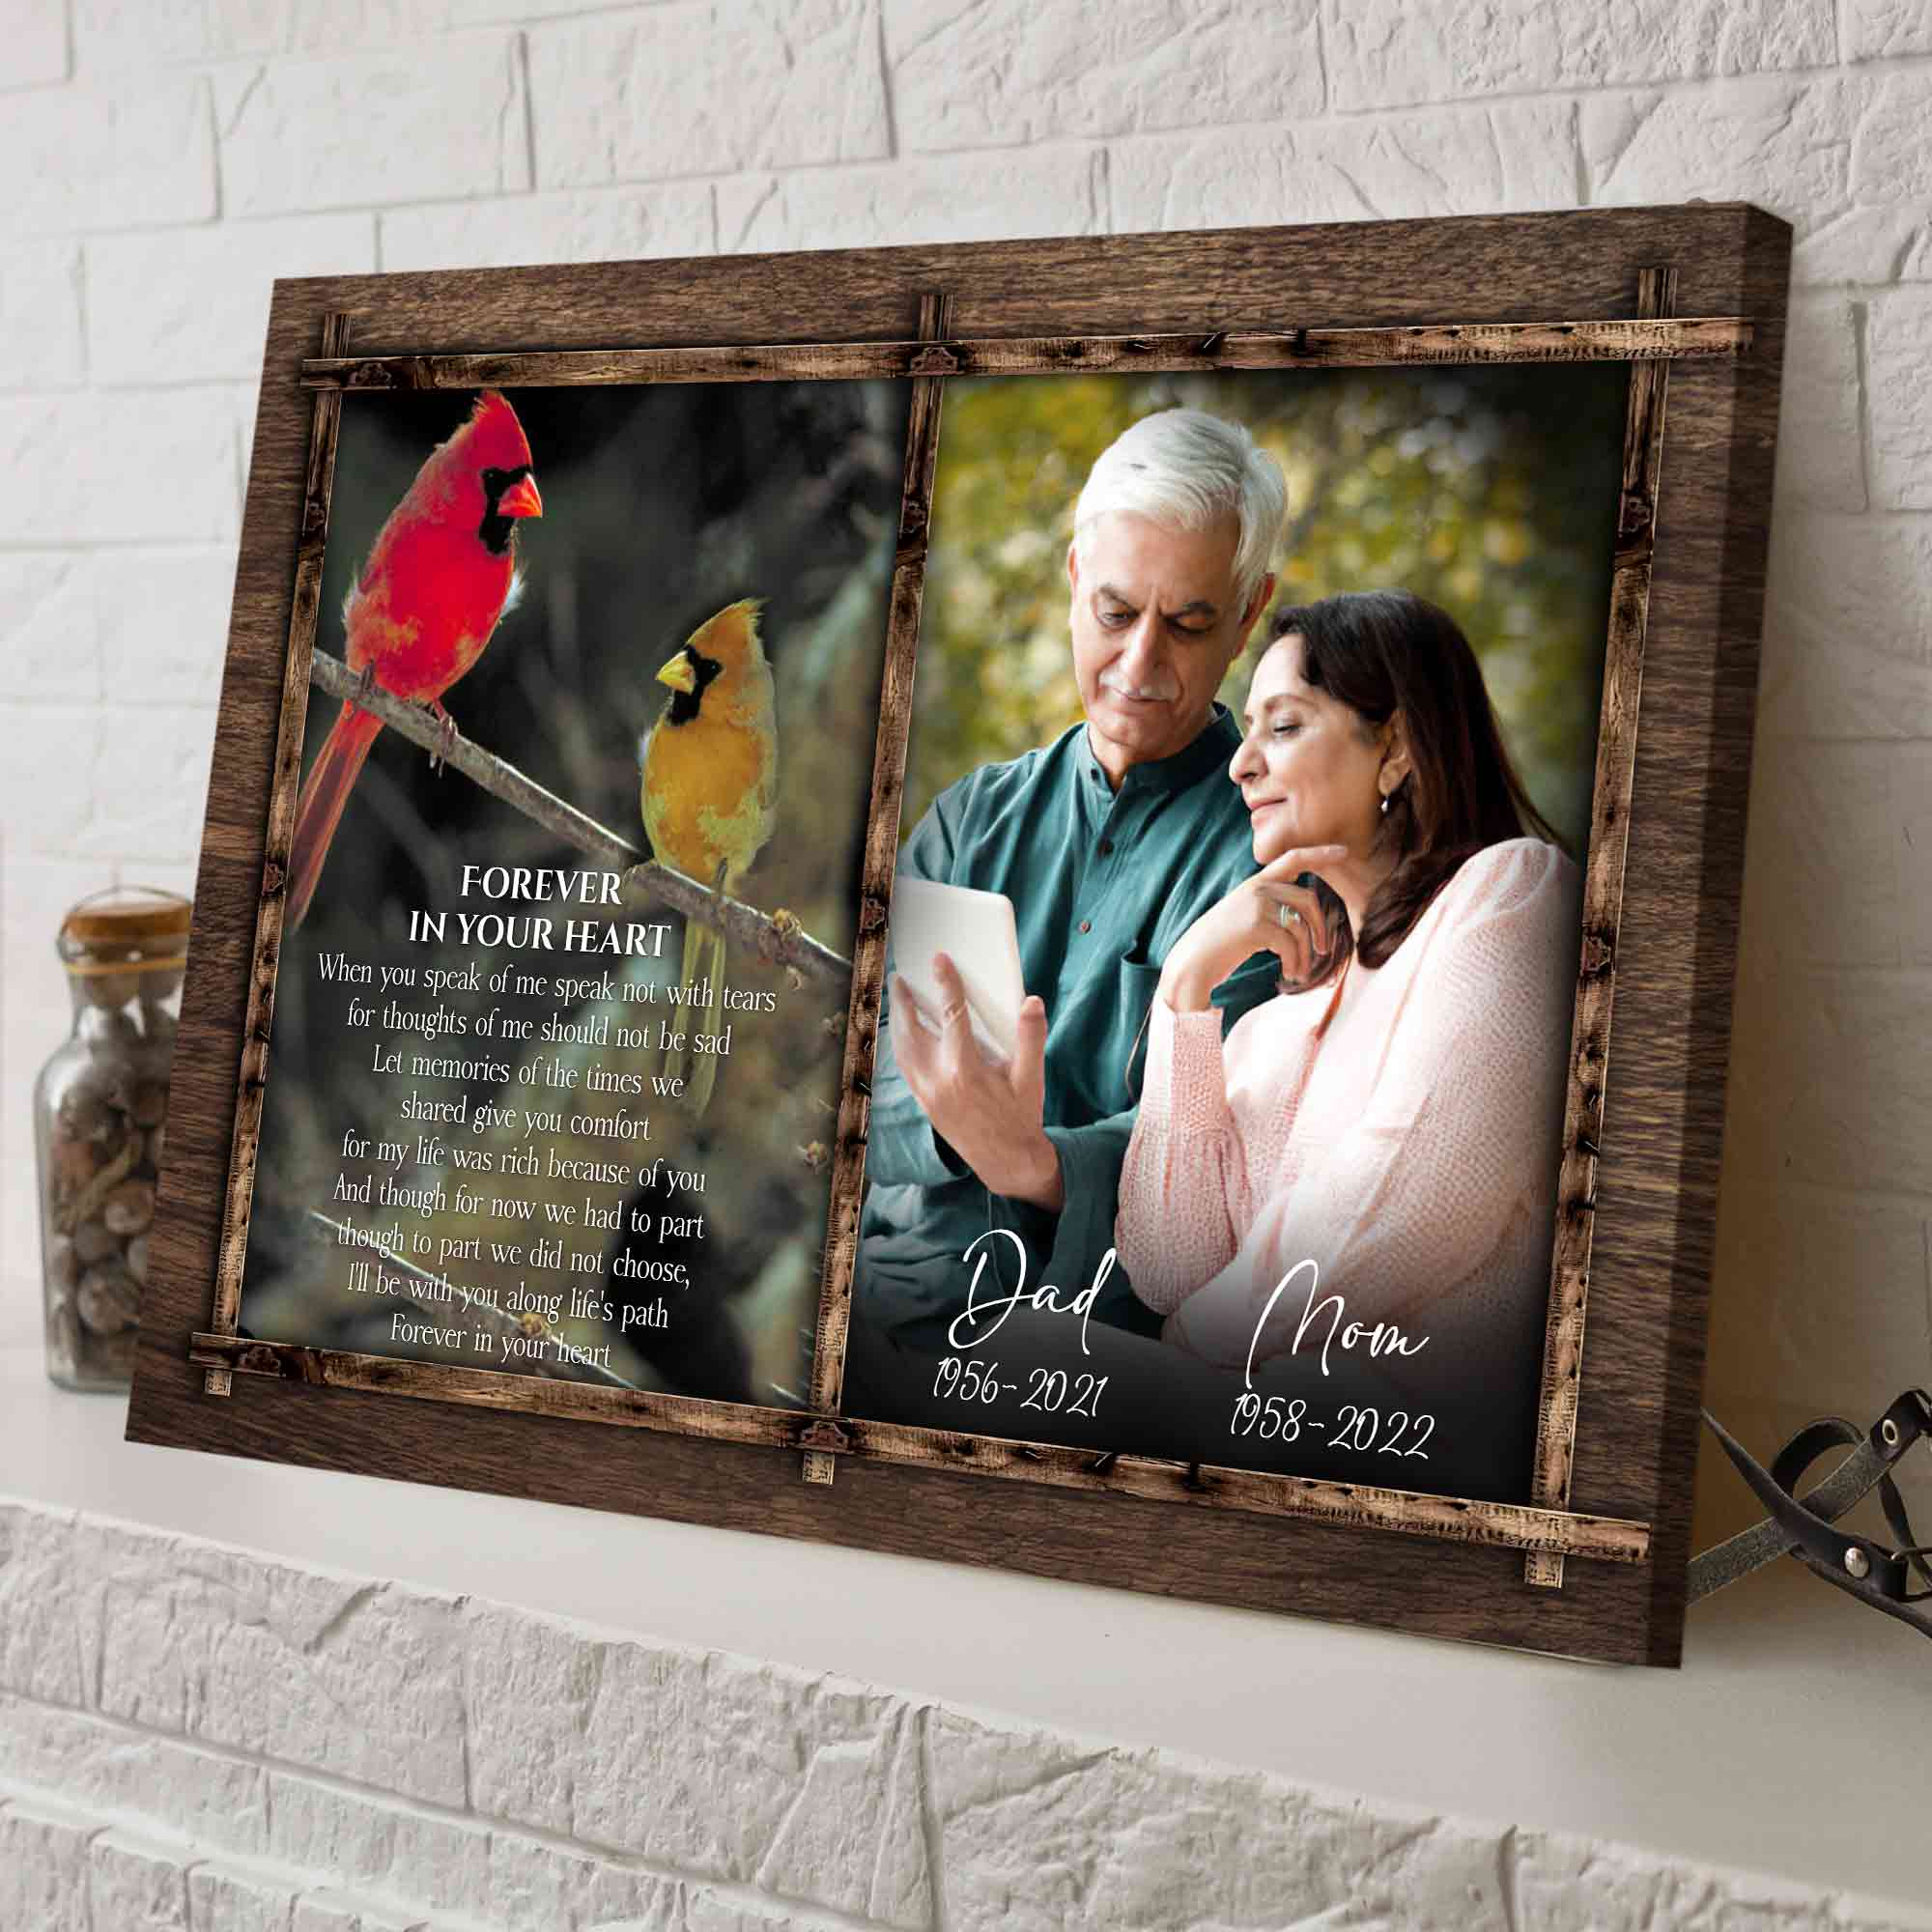 Memorial Gifts for Loss of Dad and Mom, Red Cardinal Memorial Canvas Photos For Loss Of Parent, Personalized Memorial Gifts With Photo